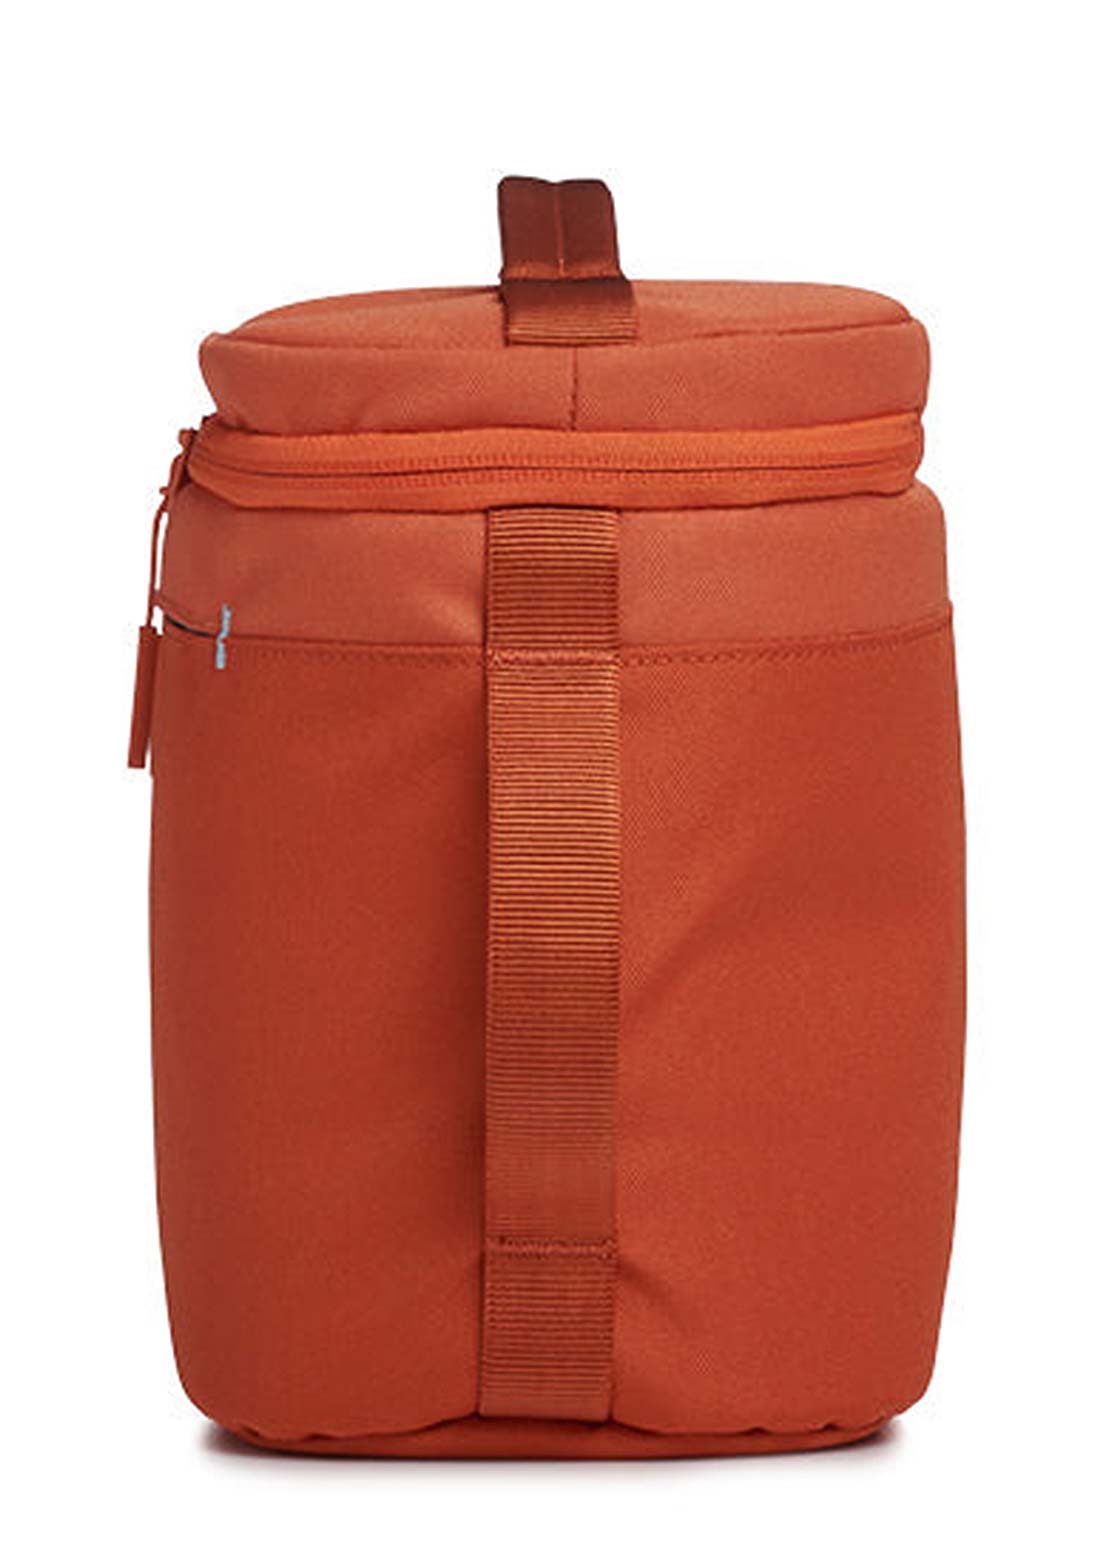 Hydro Flask 5L Insulated Lunch Bag Chili